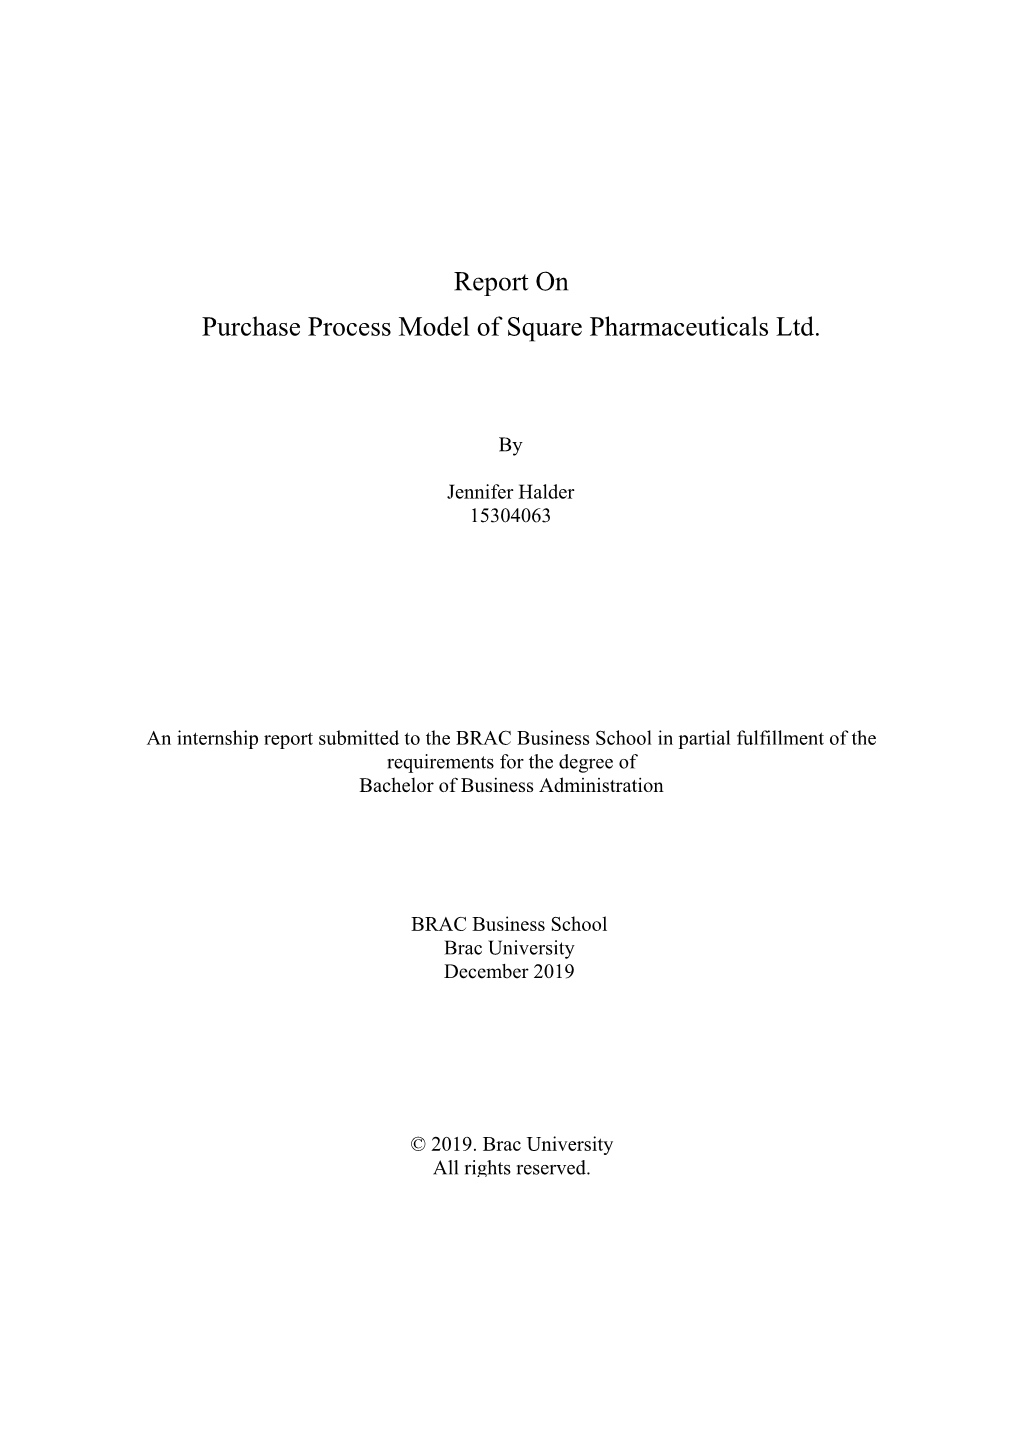 Report on Purchase Process Model of Square Pharmaceuticals Ltd